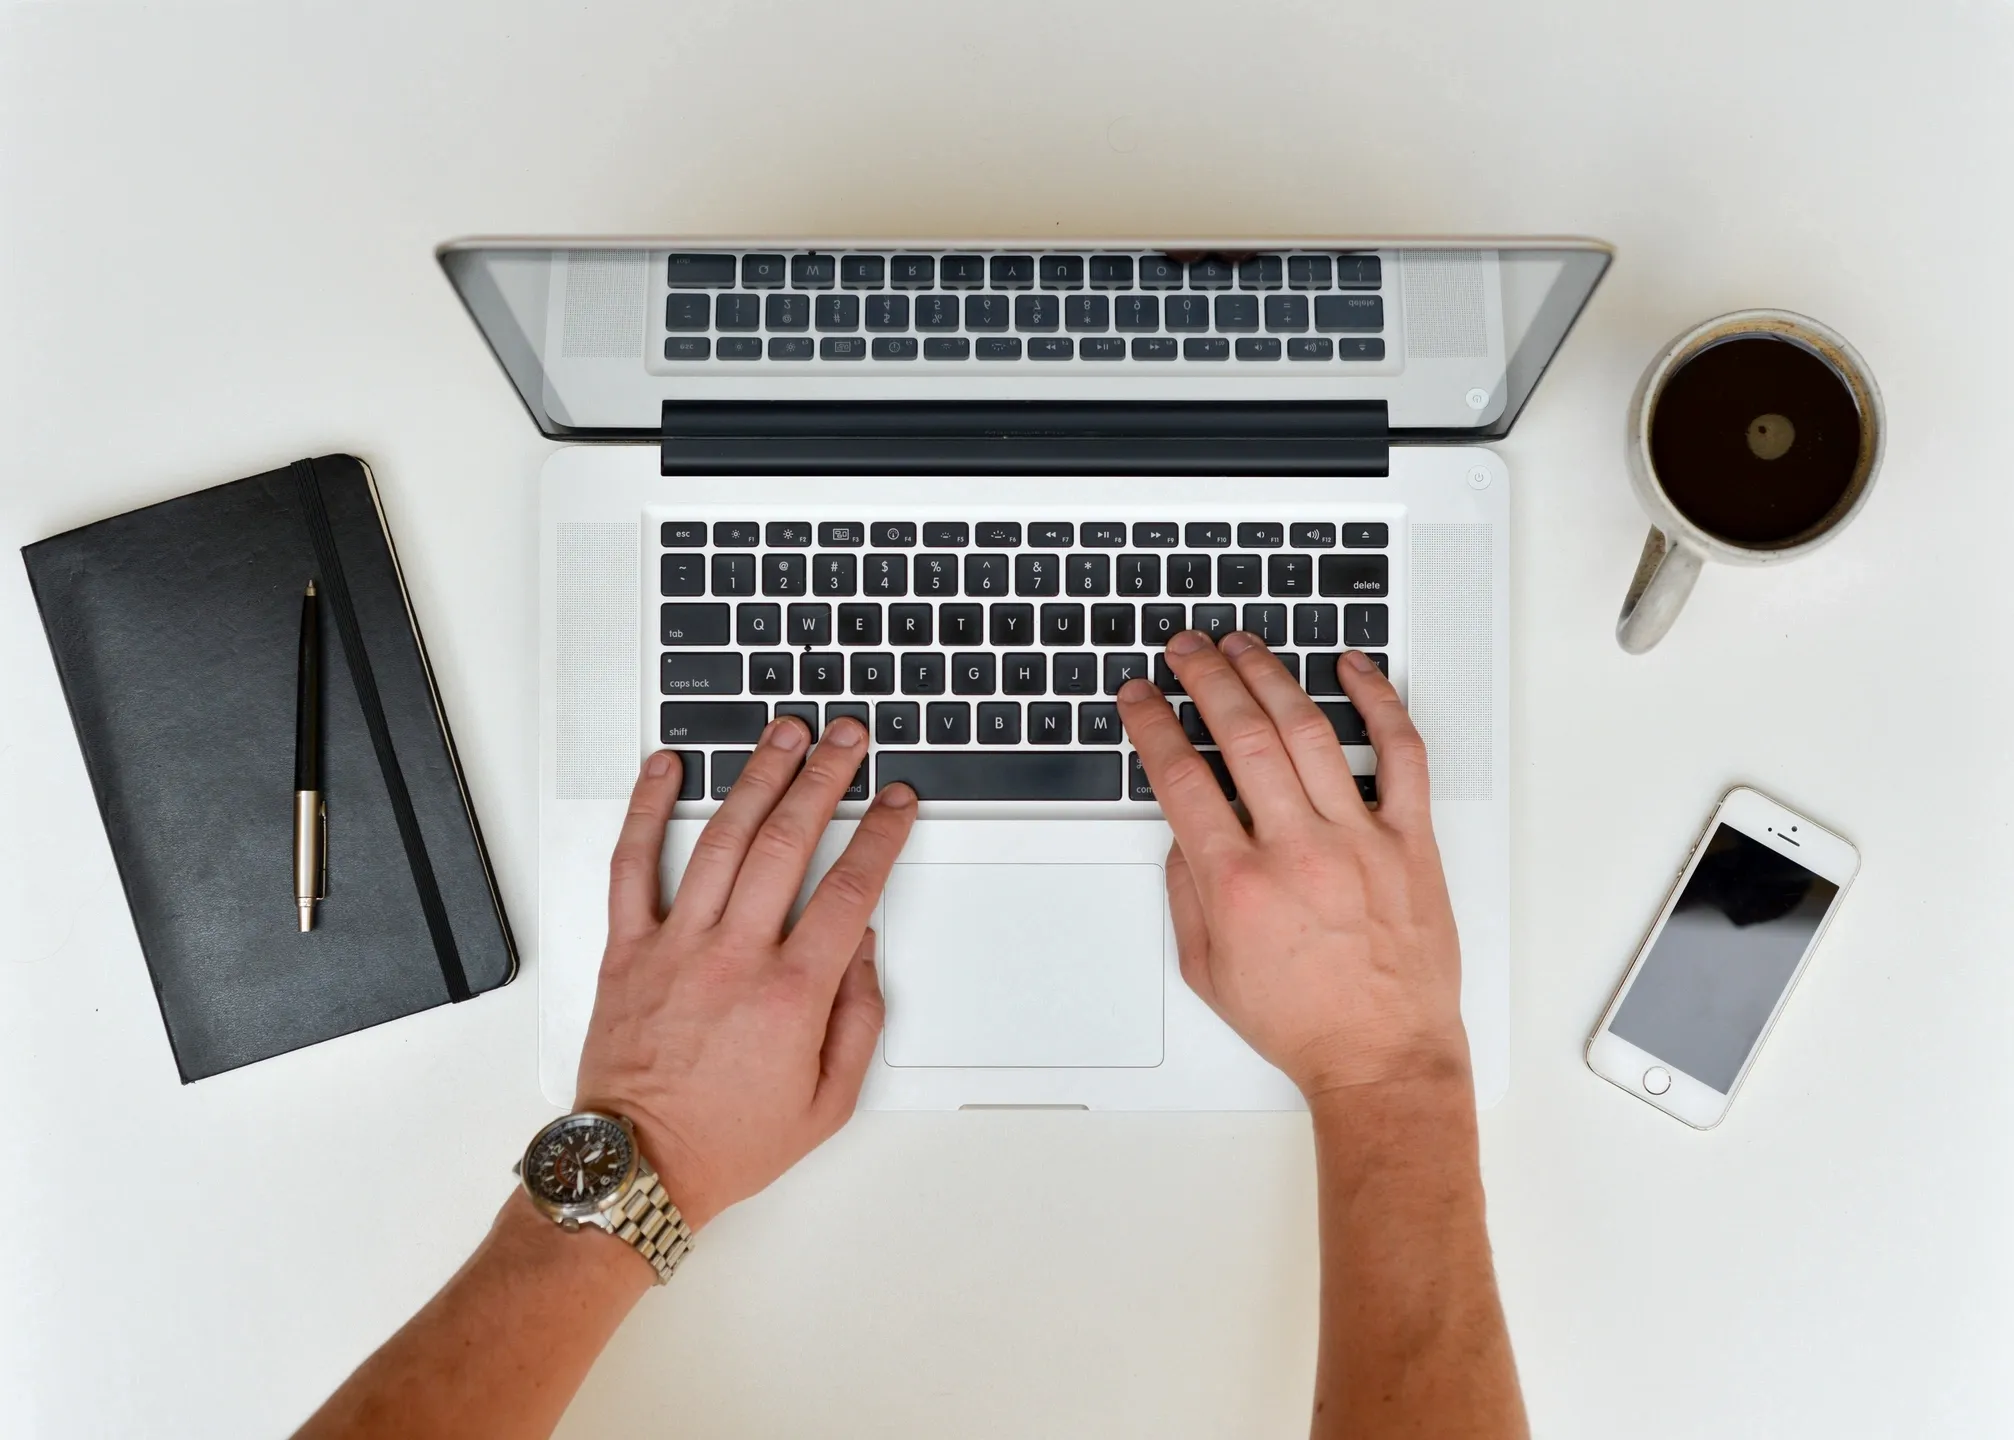 A birds eye view of hands typing on a laptop. A black notebook and
            pen are to the left of the laptop and to the right is a cup of black coffee
            and a white Iphone.